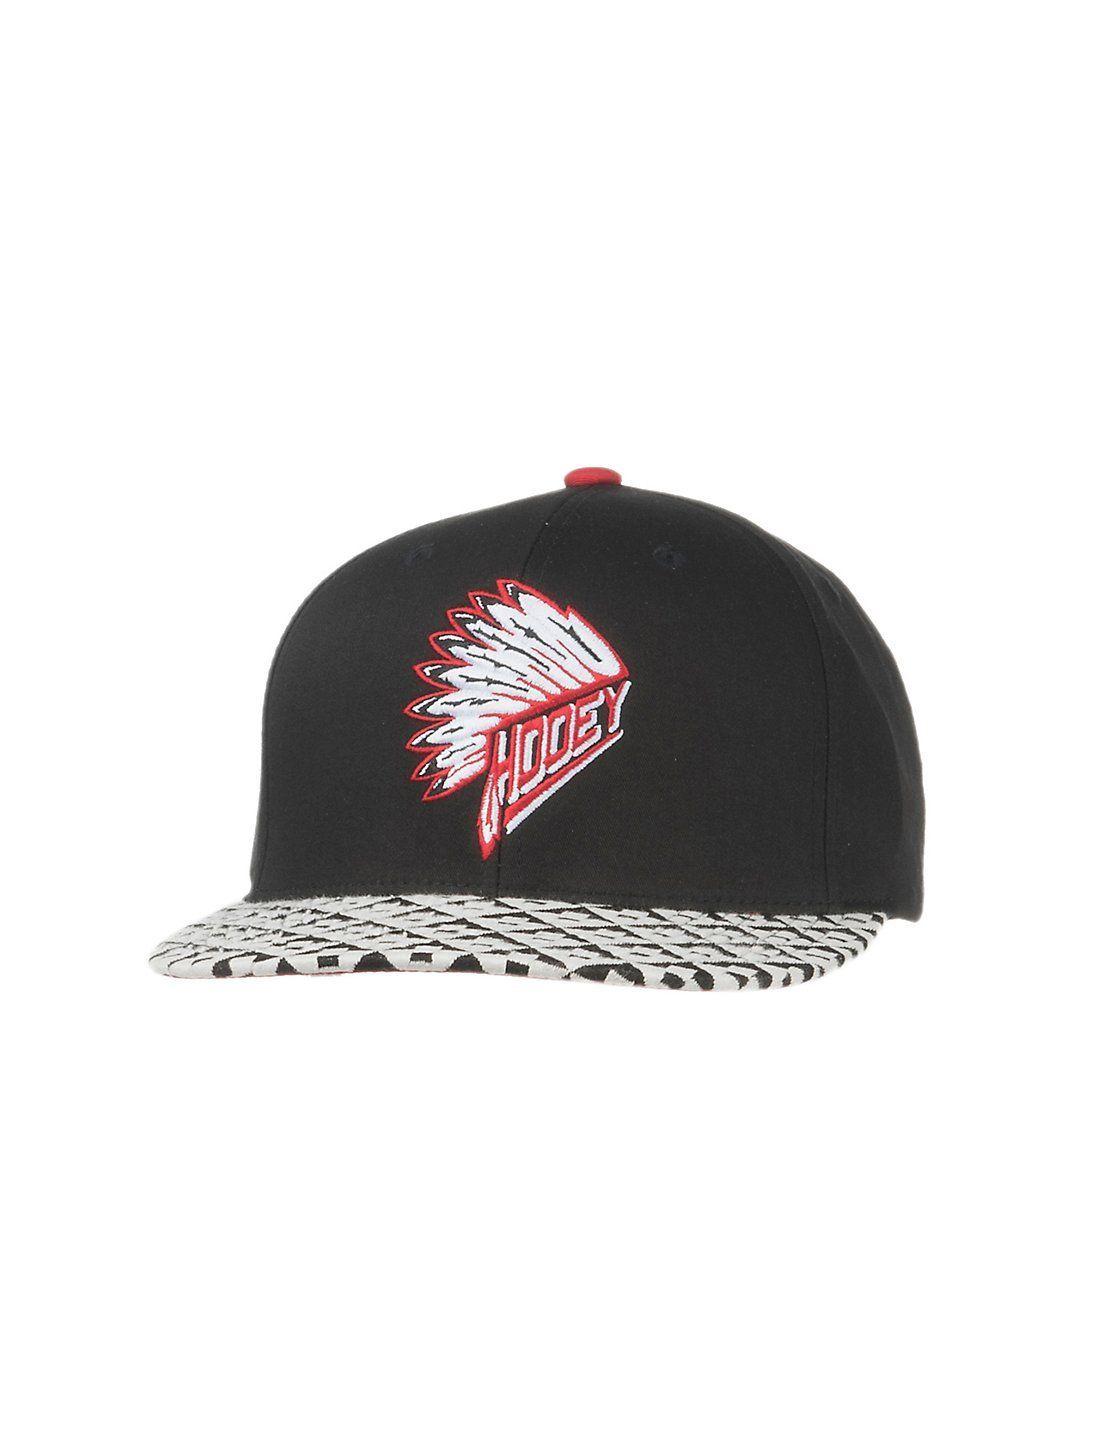 Red and Black Western Logo - HOOey Black with Aztec Print Brim and Red Chief Headdress Logo Snap